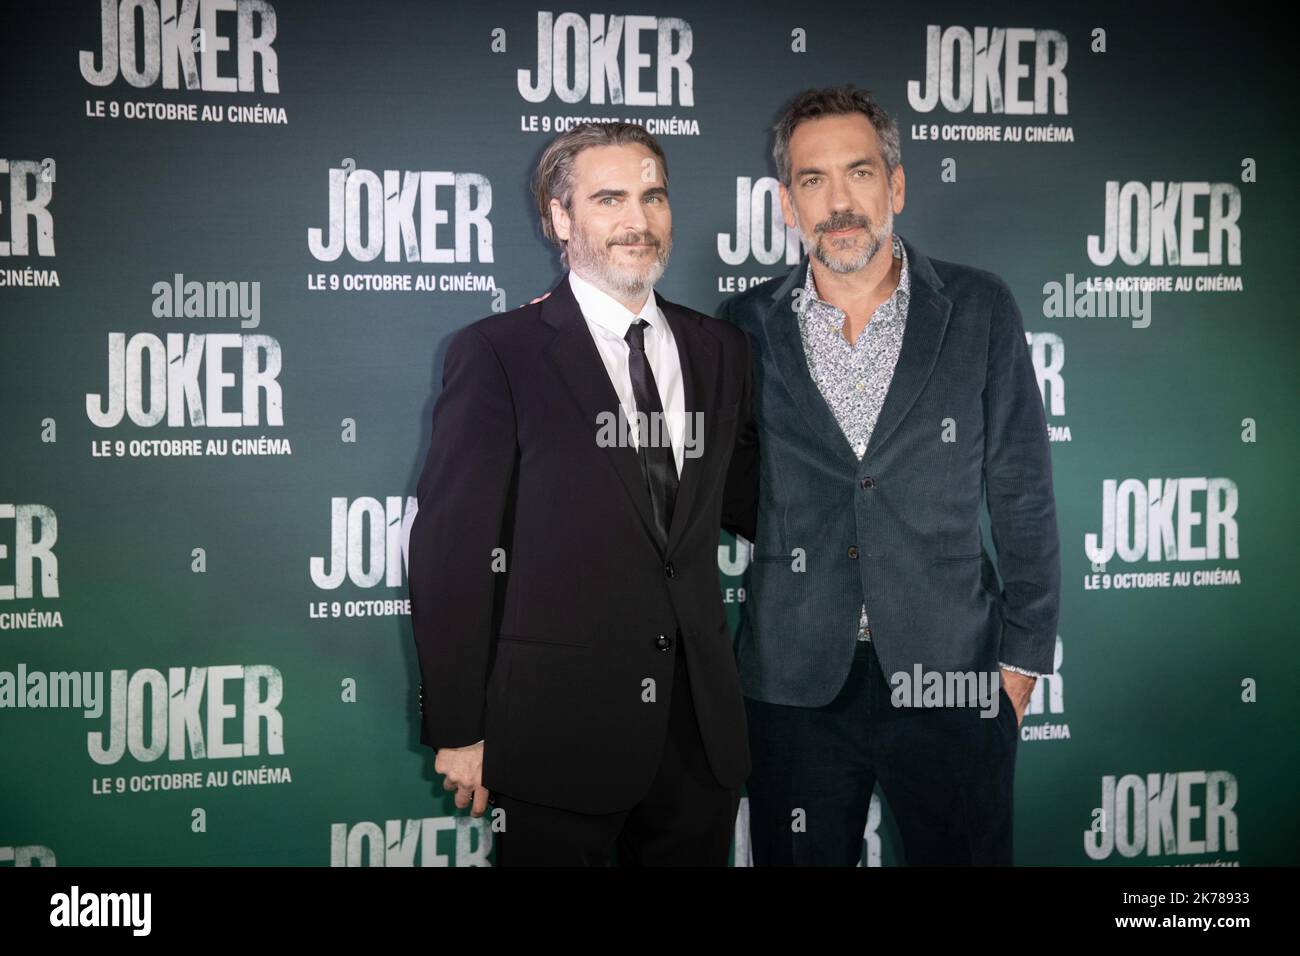 Todd Phillips And Joaquin Phoenix Photo LP / Fred Dugit -   Joker premiere in Paris, France, on sept 23rd 2019 Stock Photo